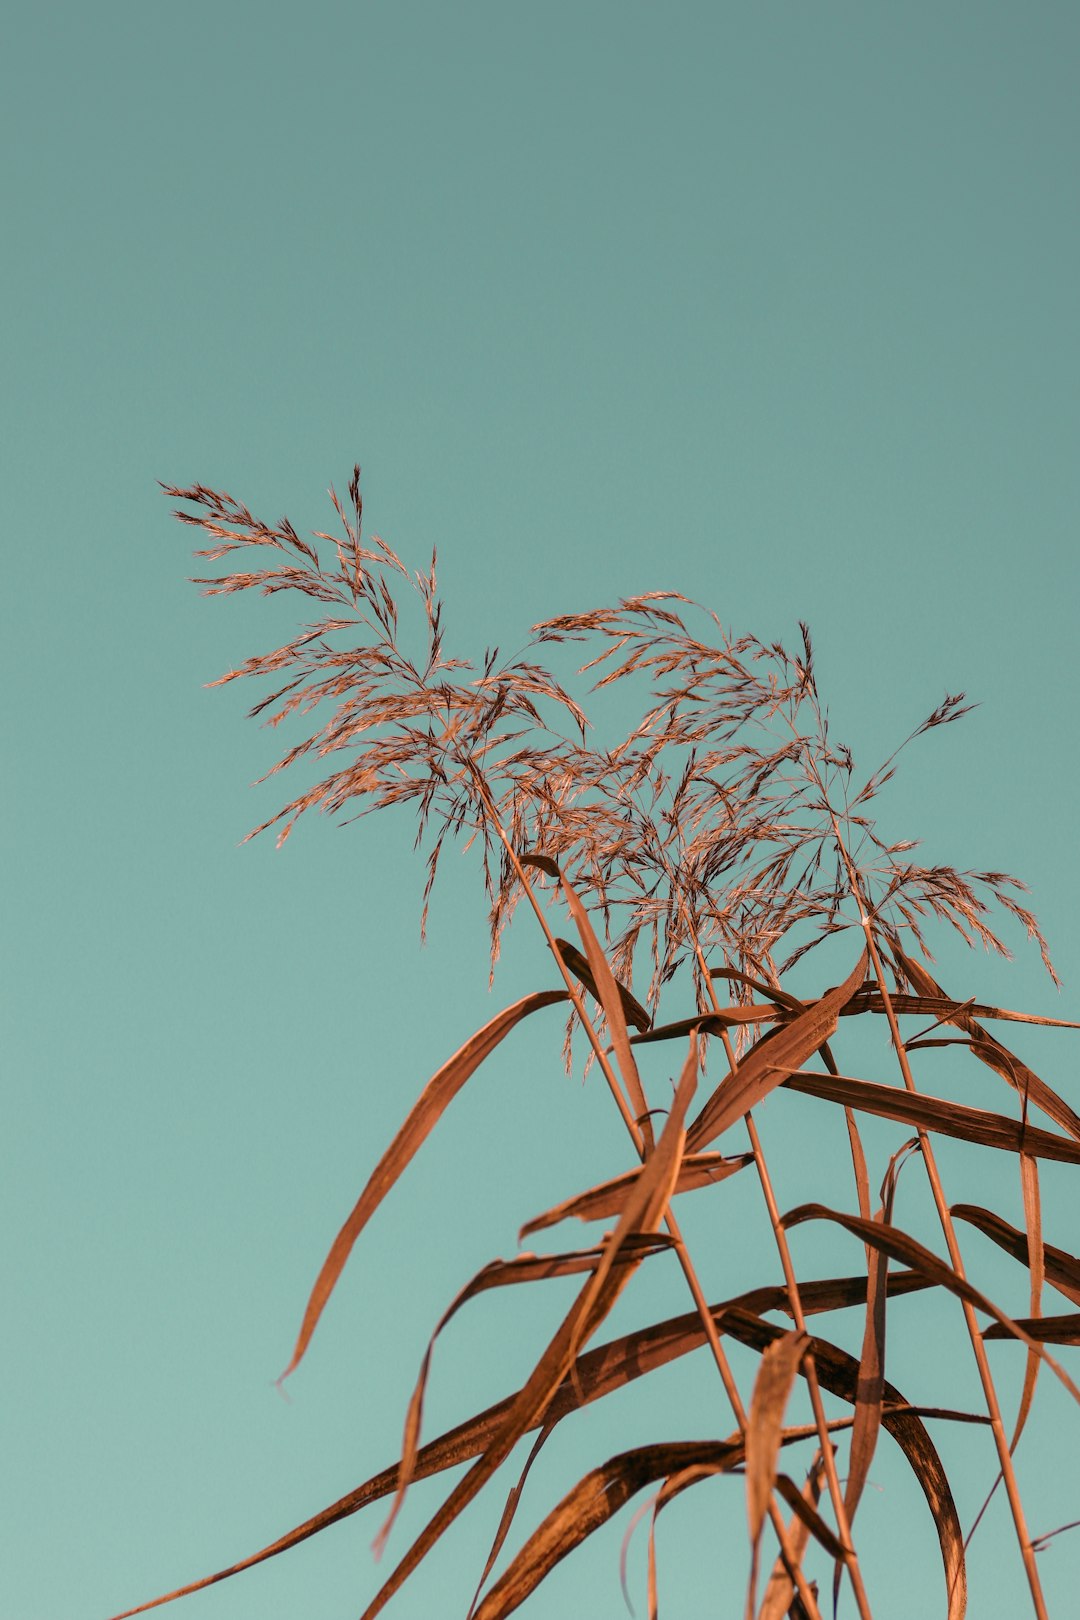 brown wheat plant under blue sky during daytime